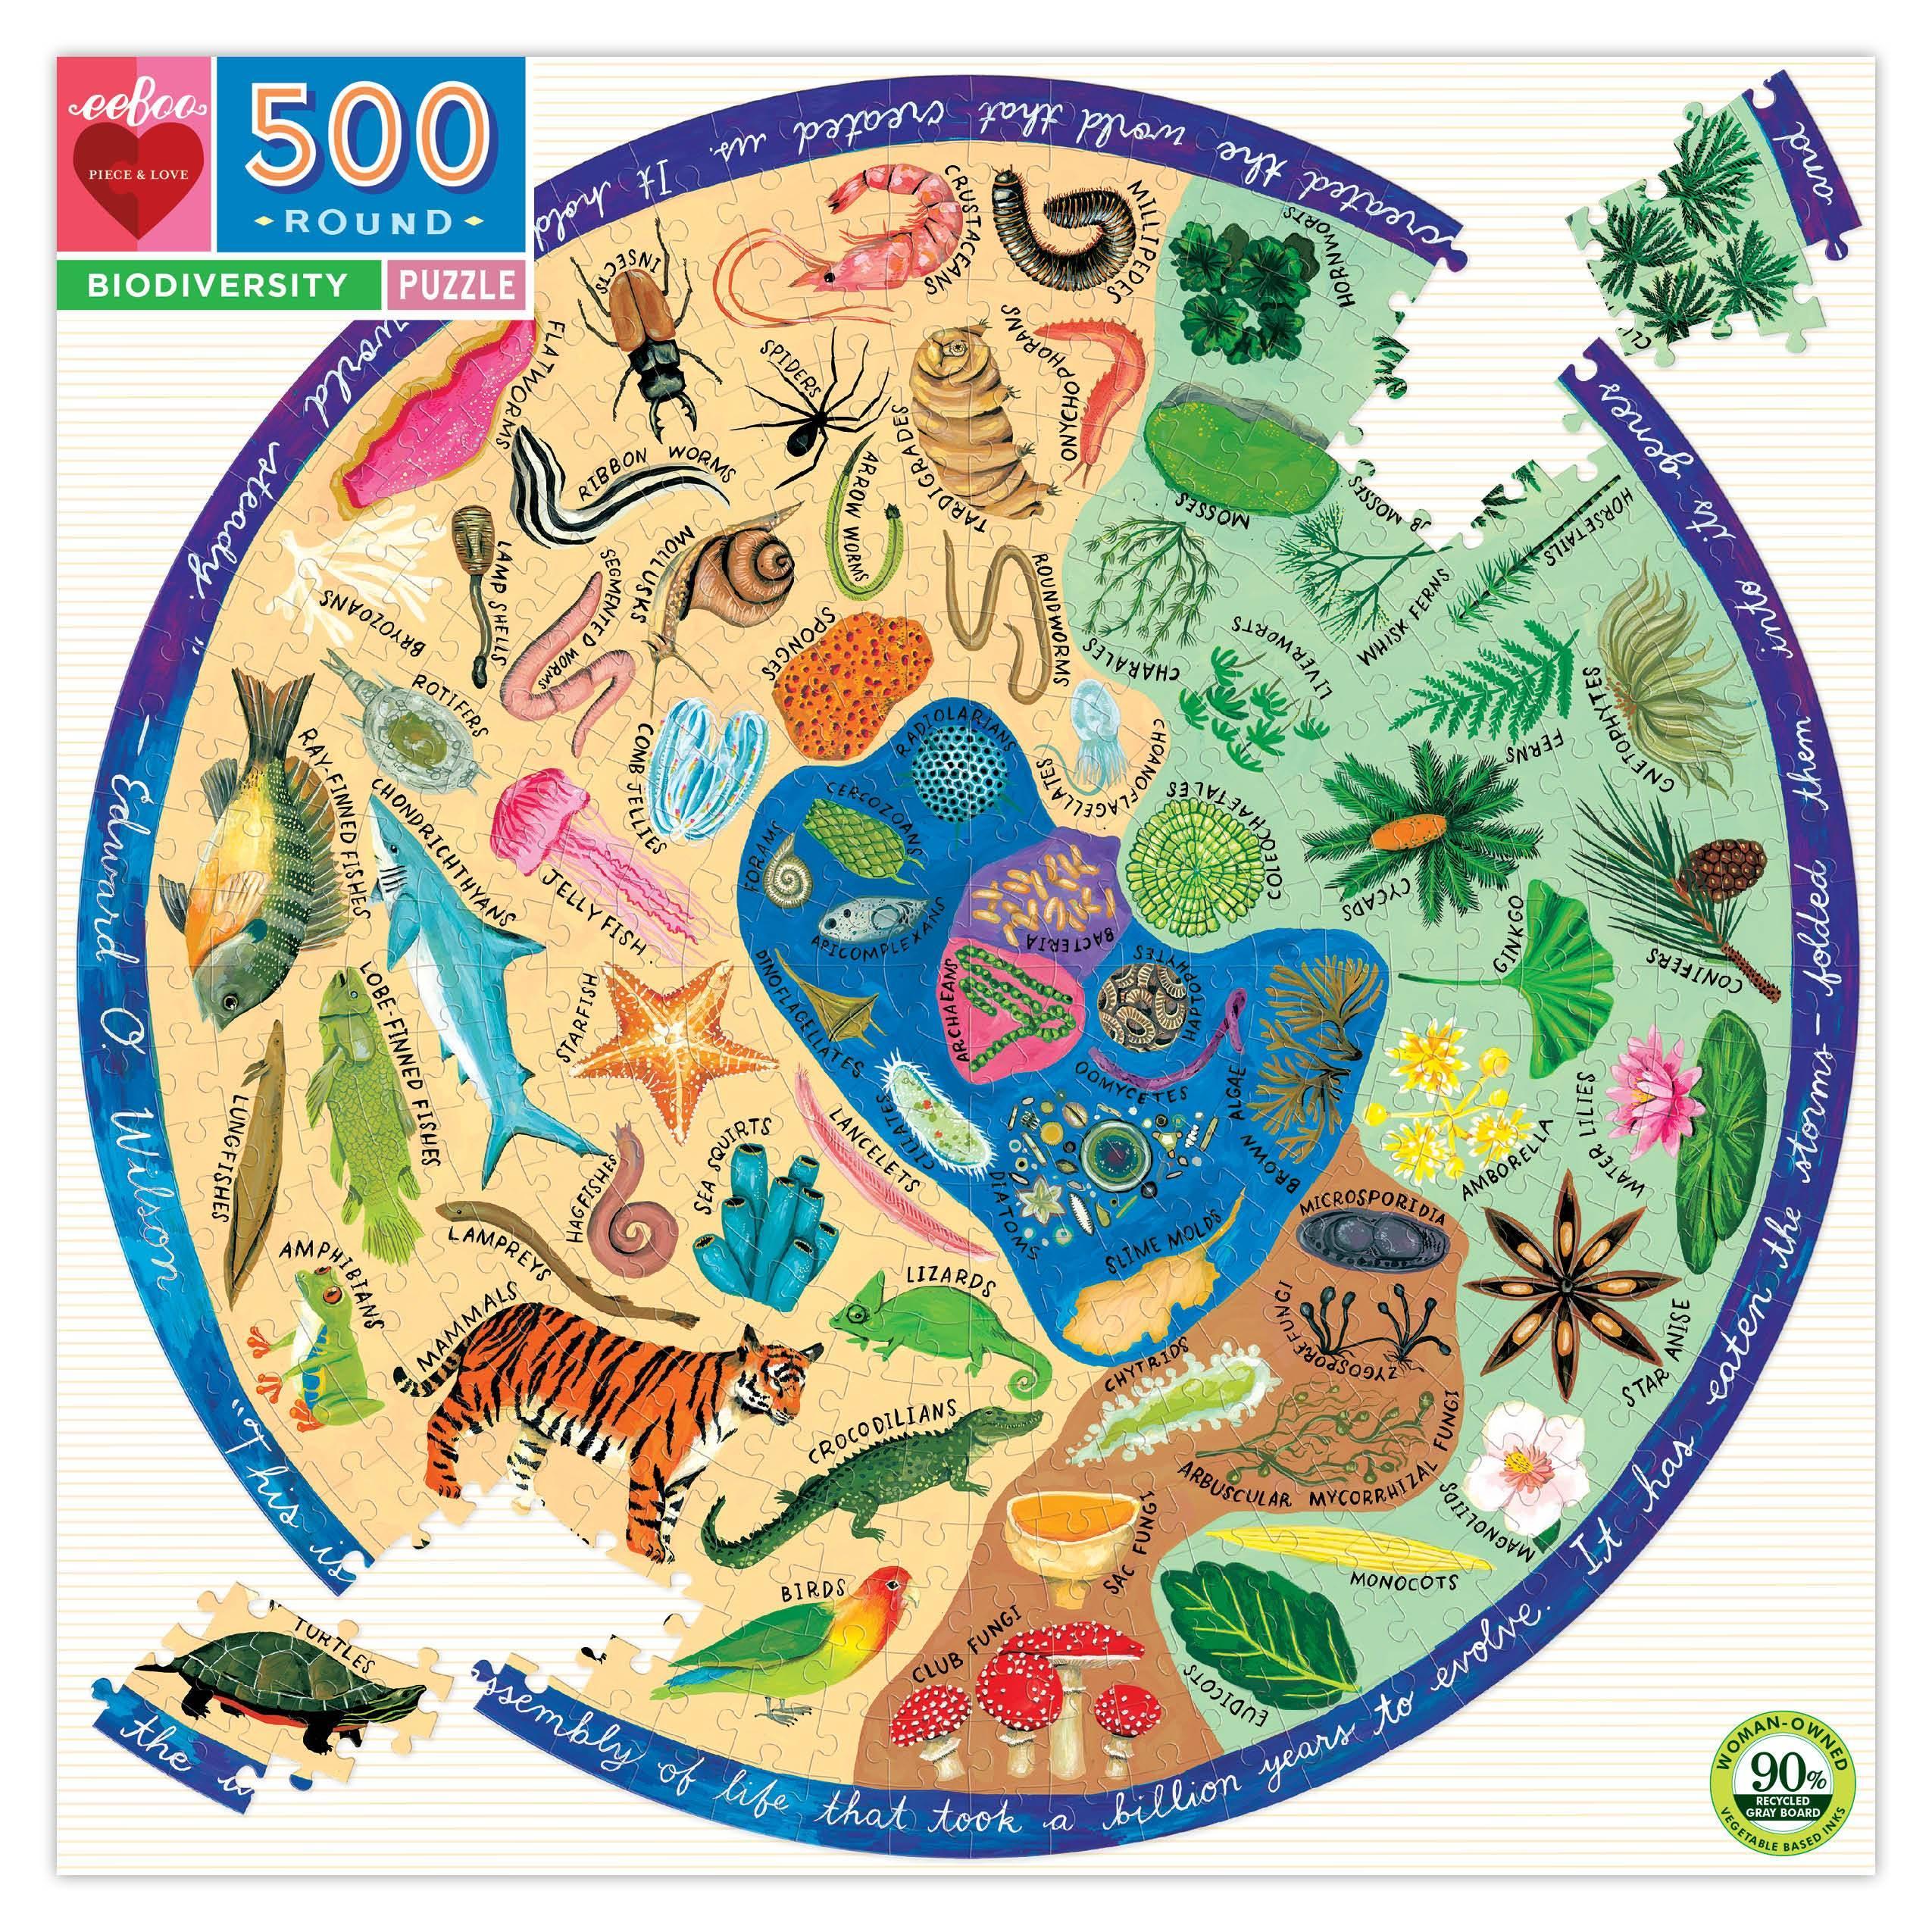 Biodiversity 500 Piece Round Puzzle - Why and Whale